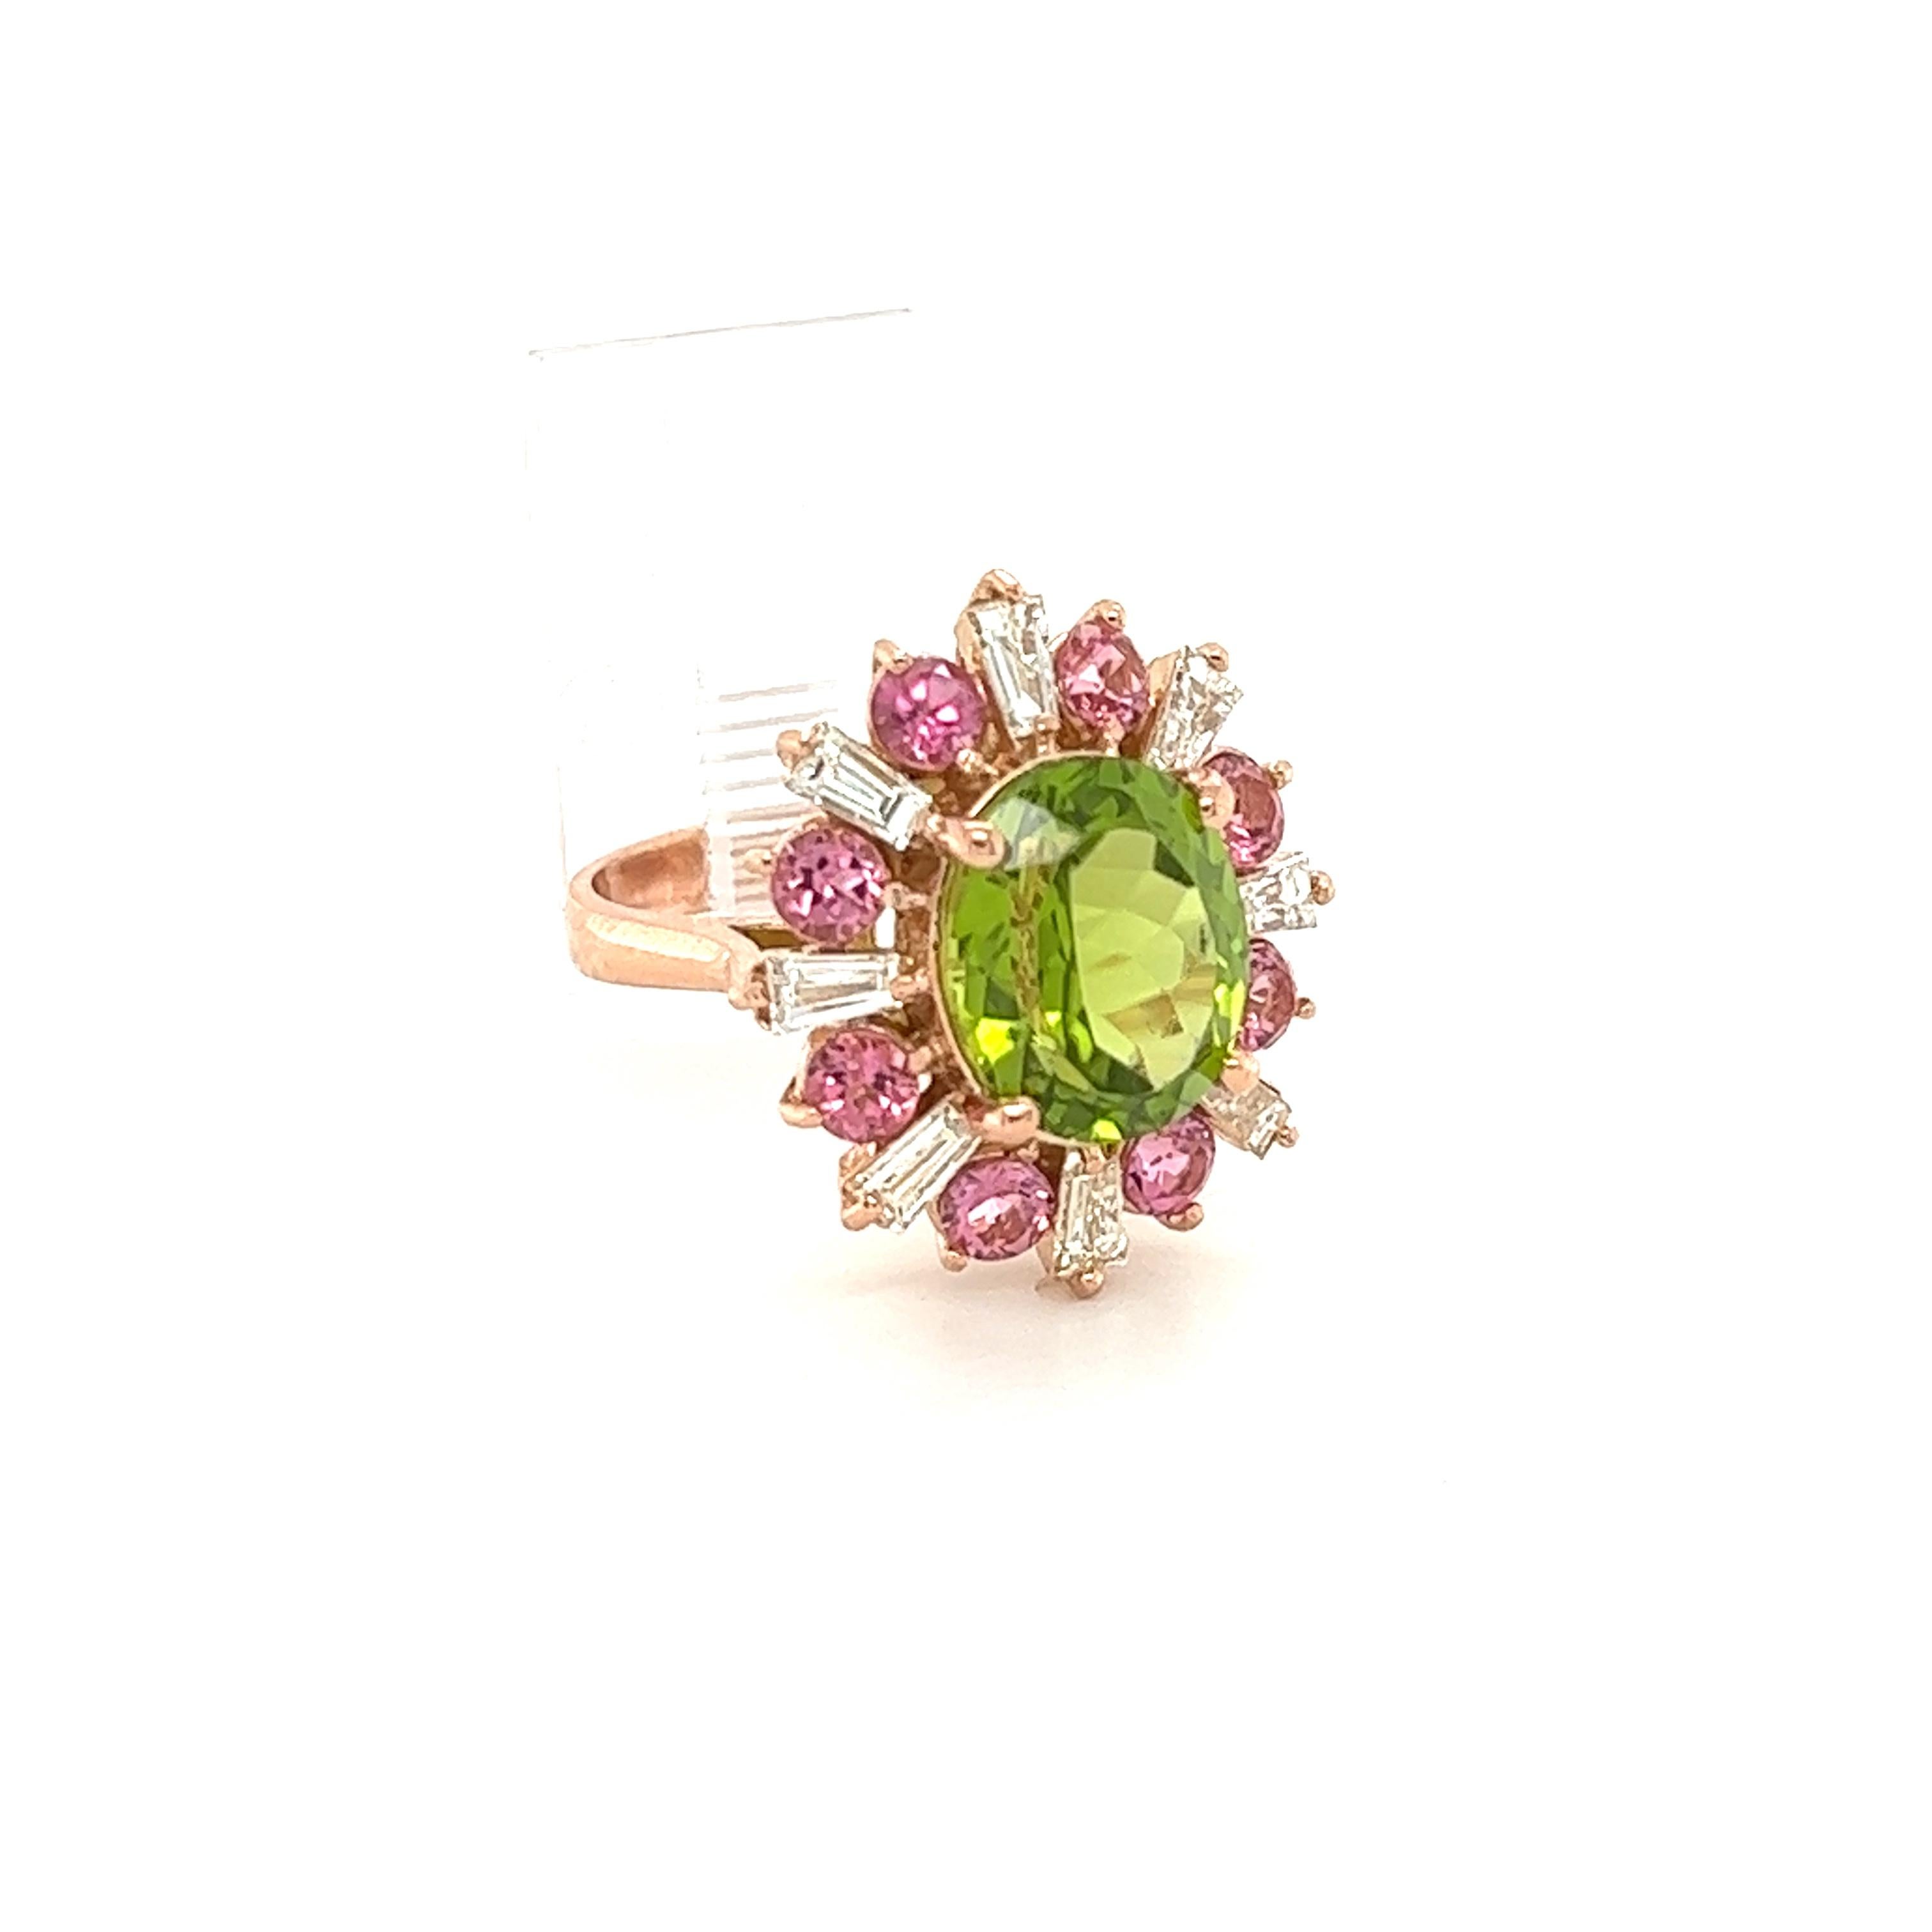 This ring has a beautiful Natural Oval Cut Peridot that weighs 5.41 Carats. The Peridot measures at 
It also has 8 Round Cut Natural Tourmalines that weigh 1.33 Carats as well as 8 Baguette Cut Diamonds that weigh 0.83 Carats. (Clarity: VS, Color: